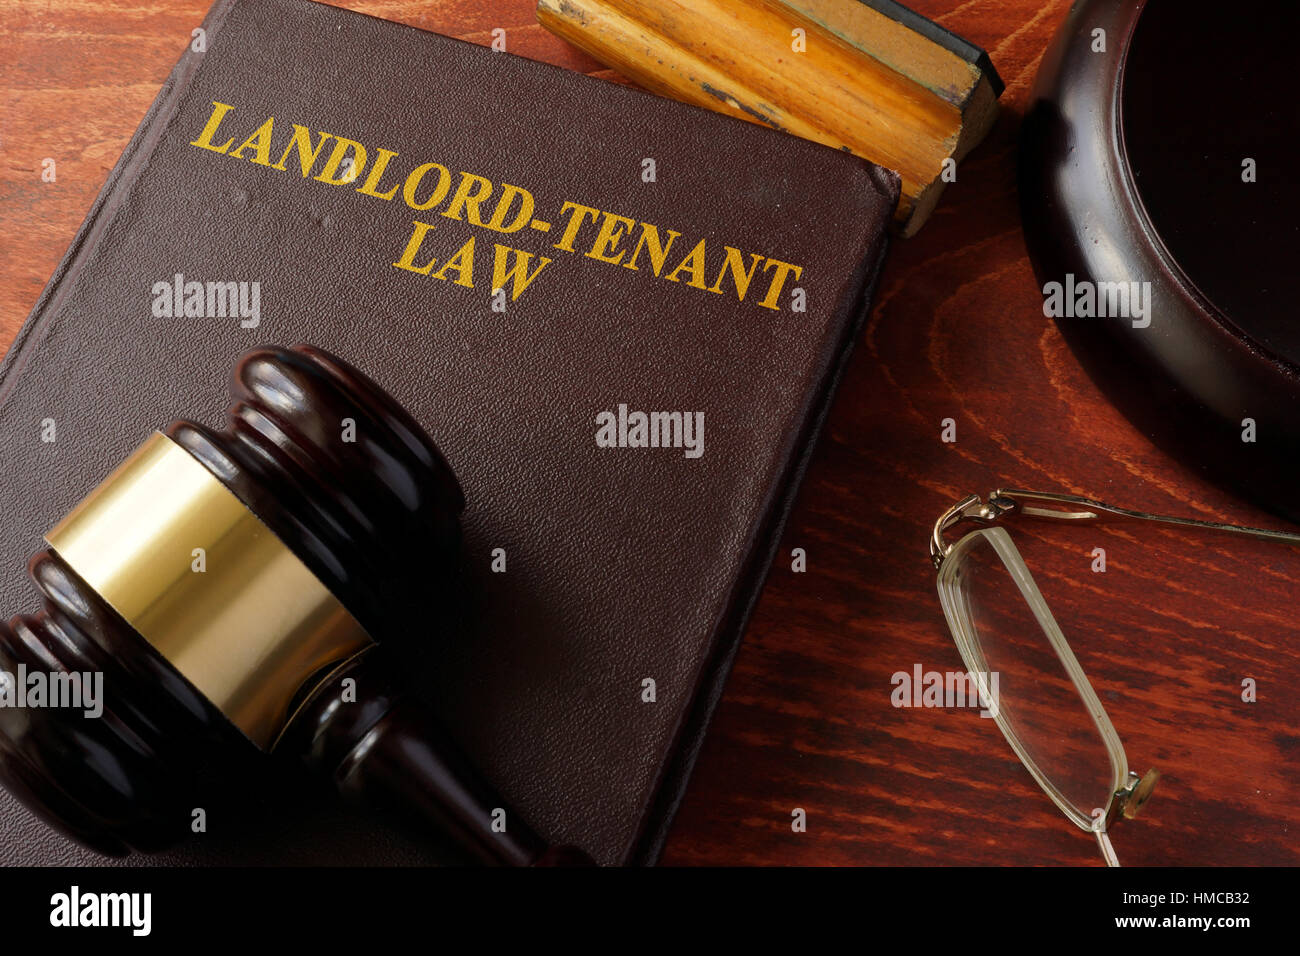 Book with title Landlord-Tenant Law and a gavel. Stock Photo